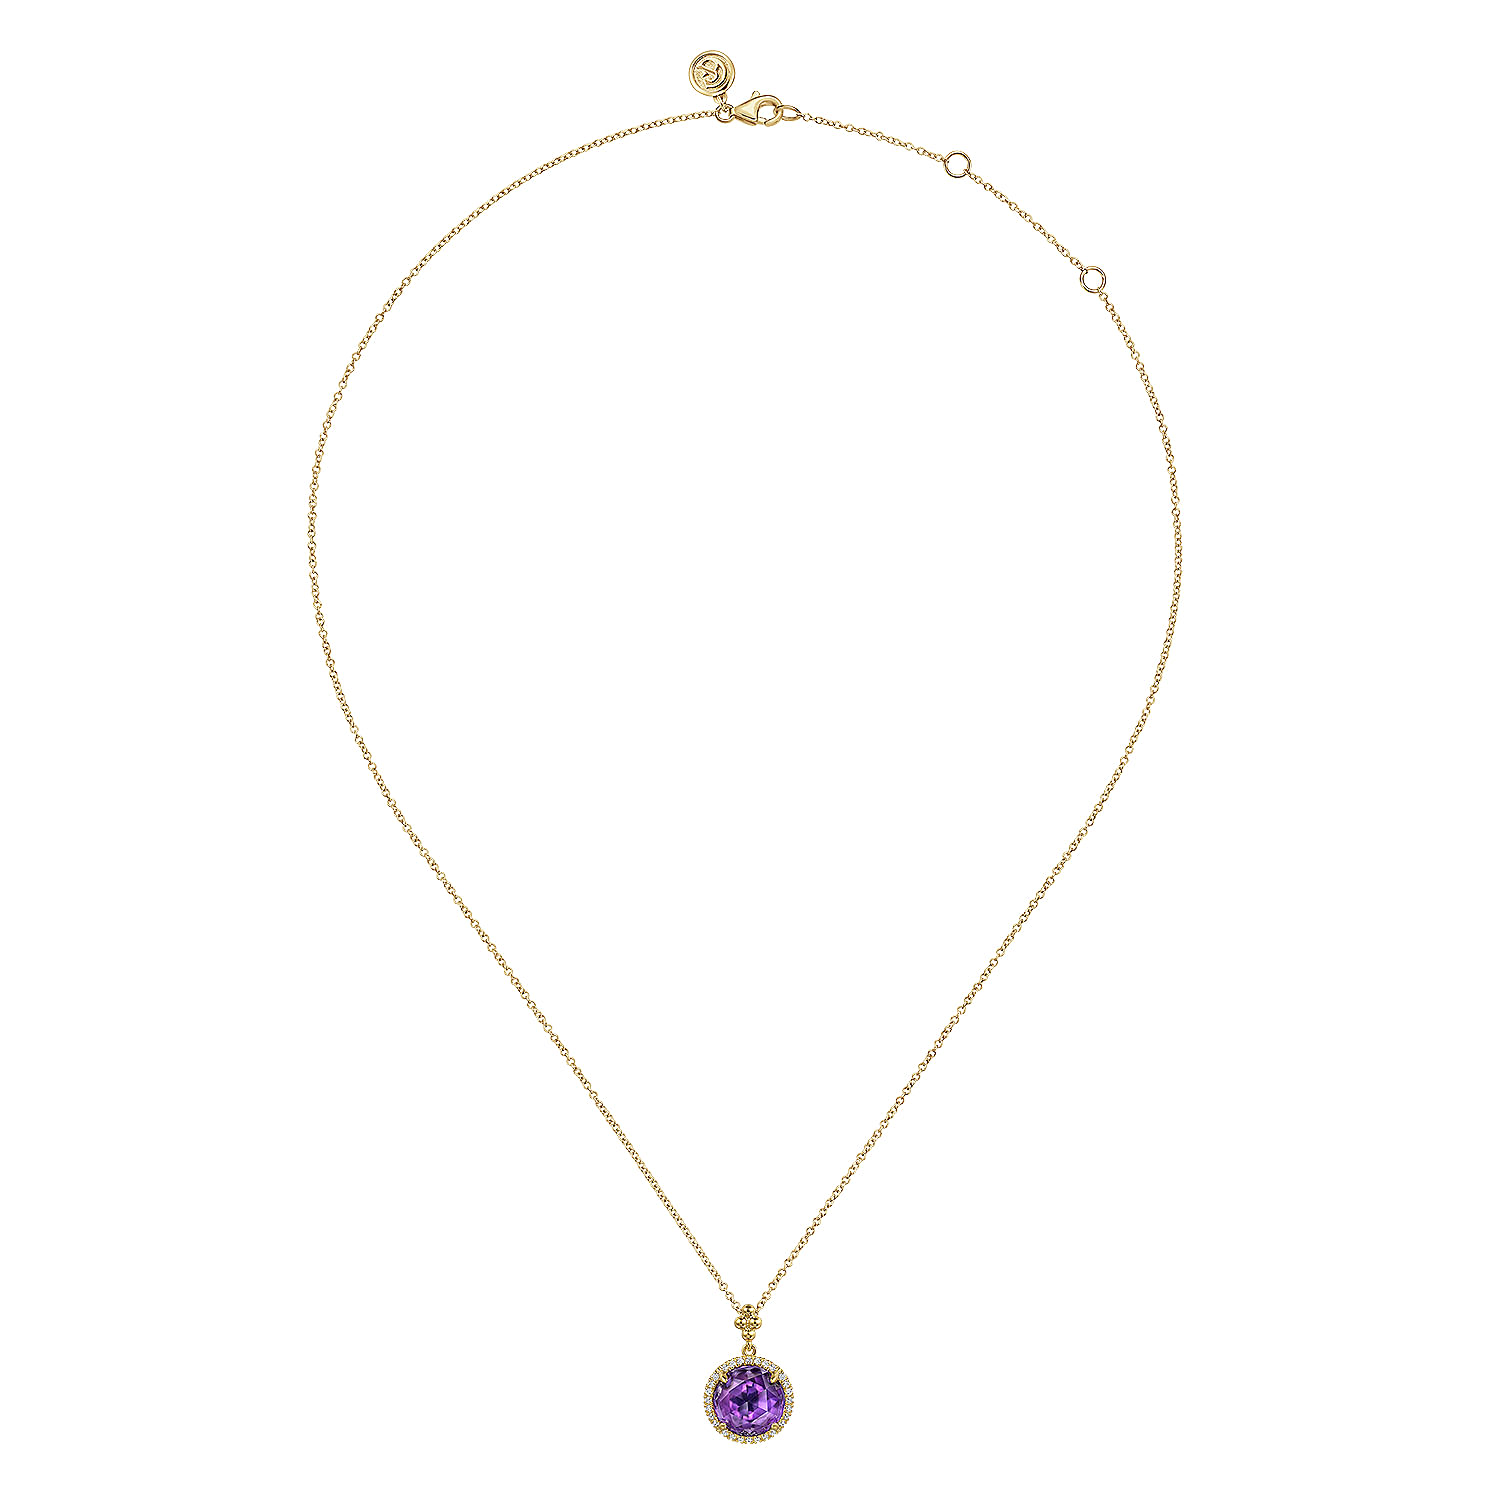 14K Yellow Gold Round Amethysts with Diamond Halo Necklace